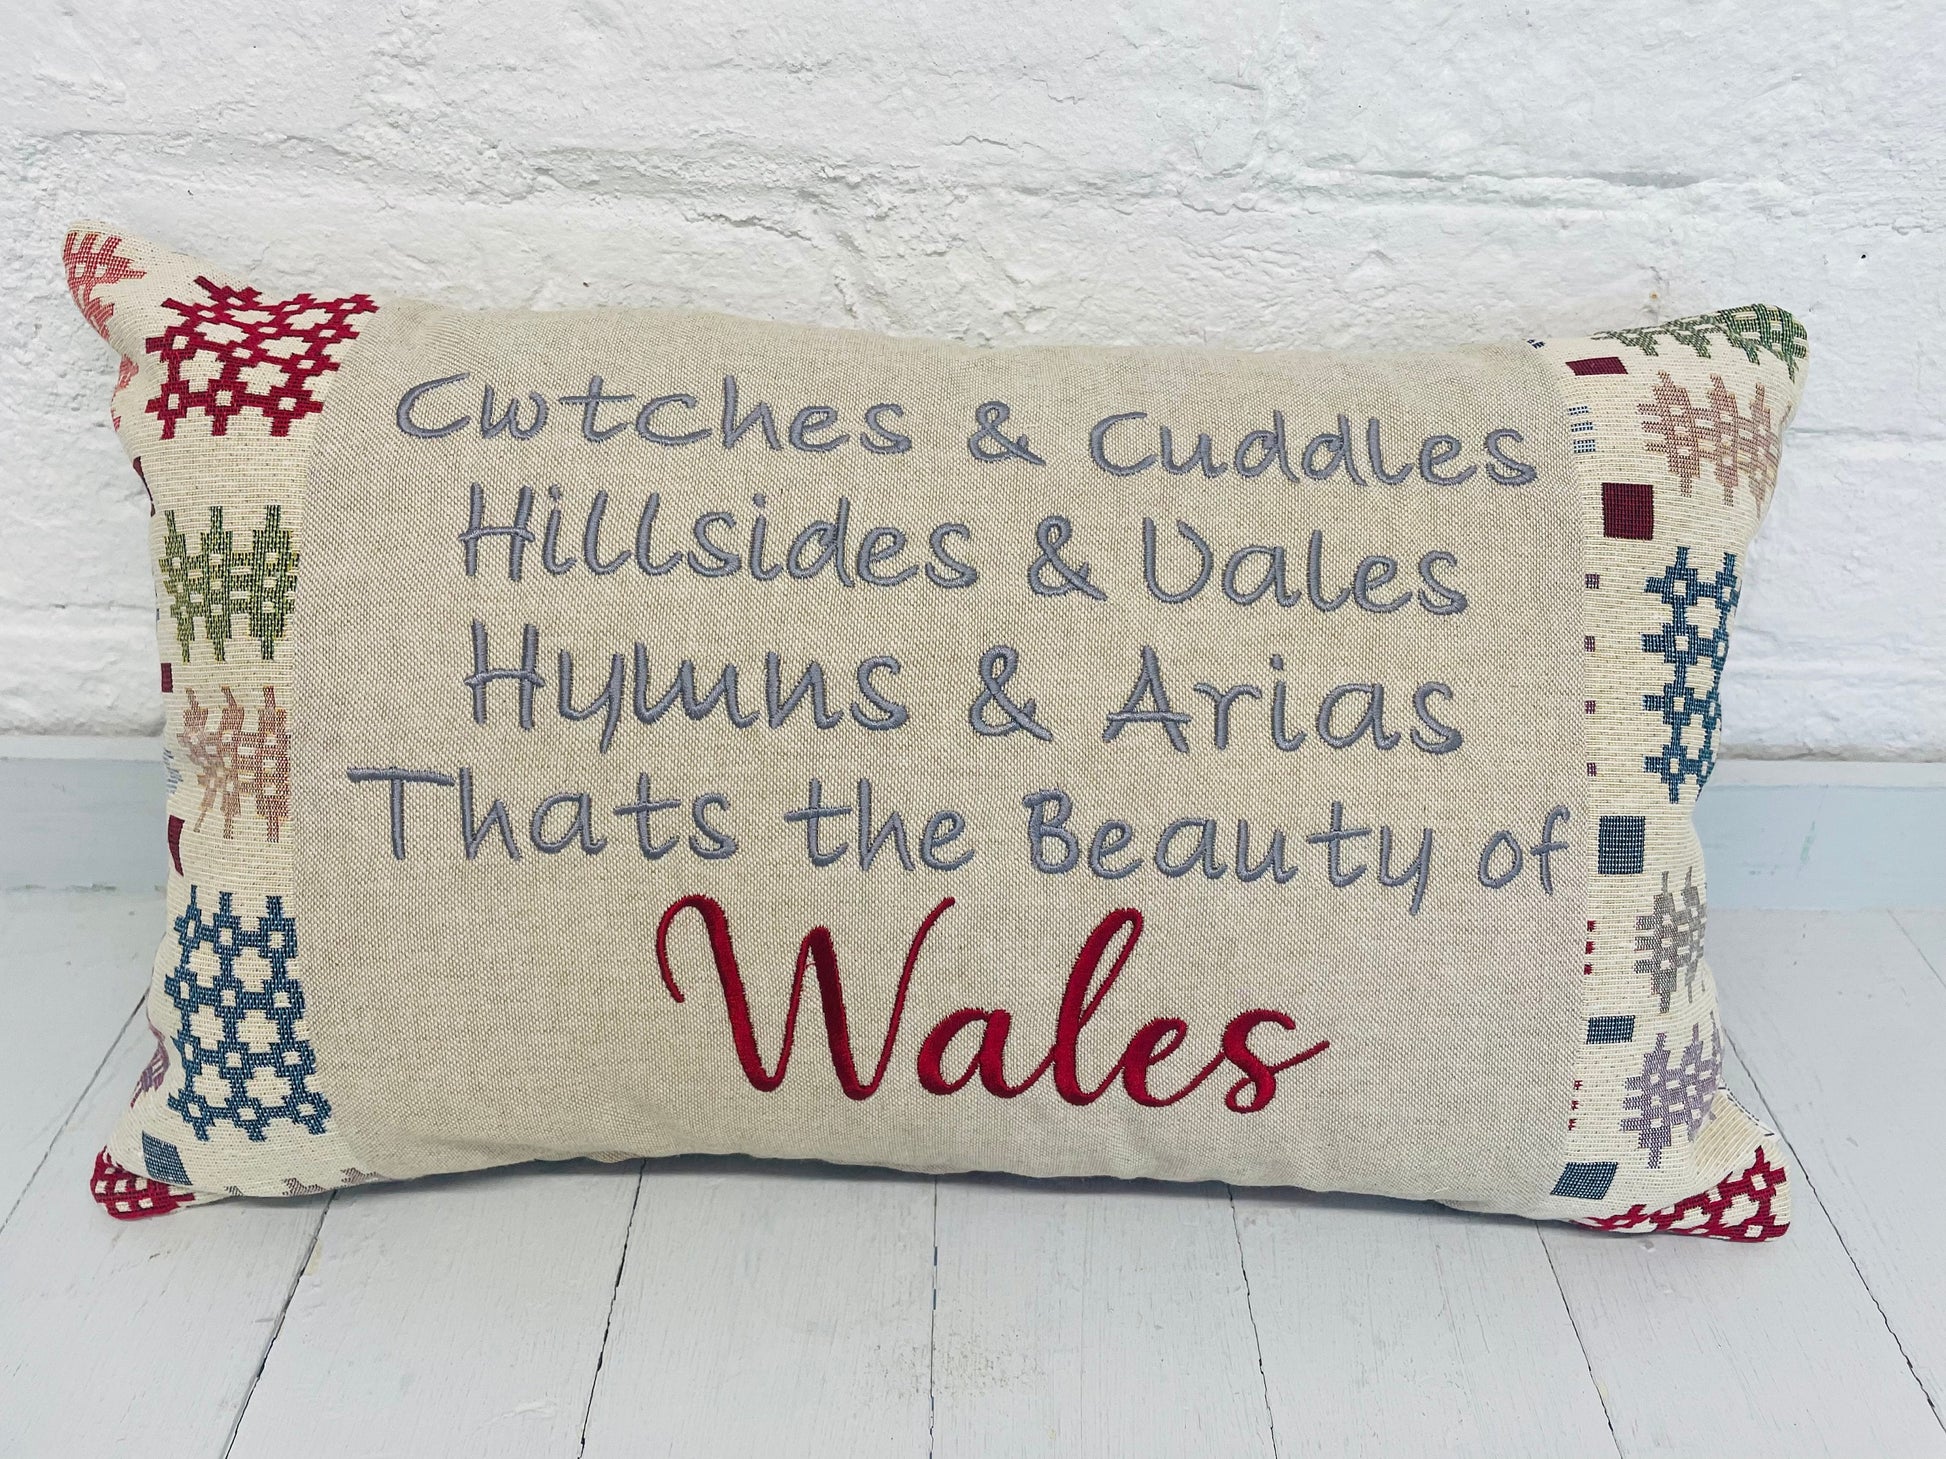 Welsh Blanket Tapestry Cushion.Cwtches & Cuddles Handmade Cushion-Welsh Cushion-Handmade welsh gifts